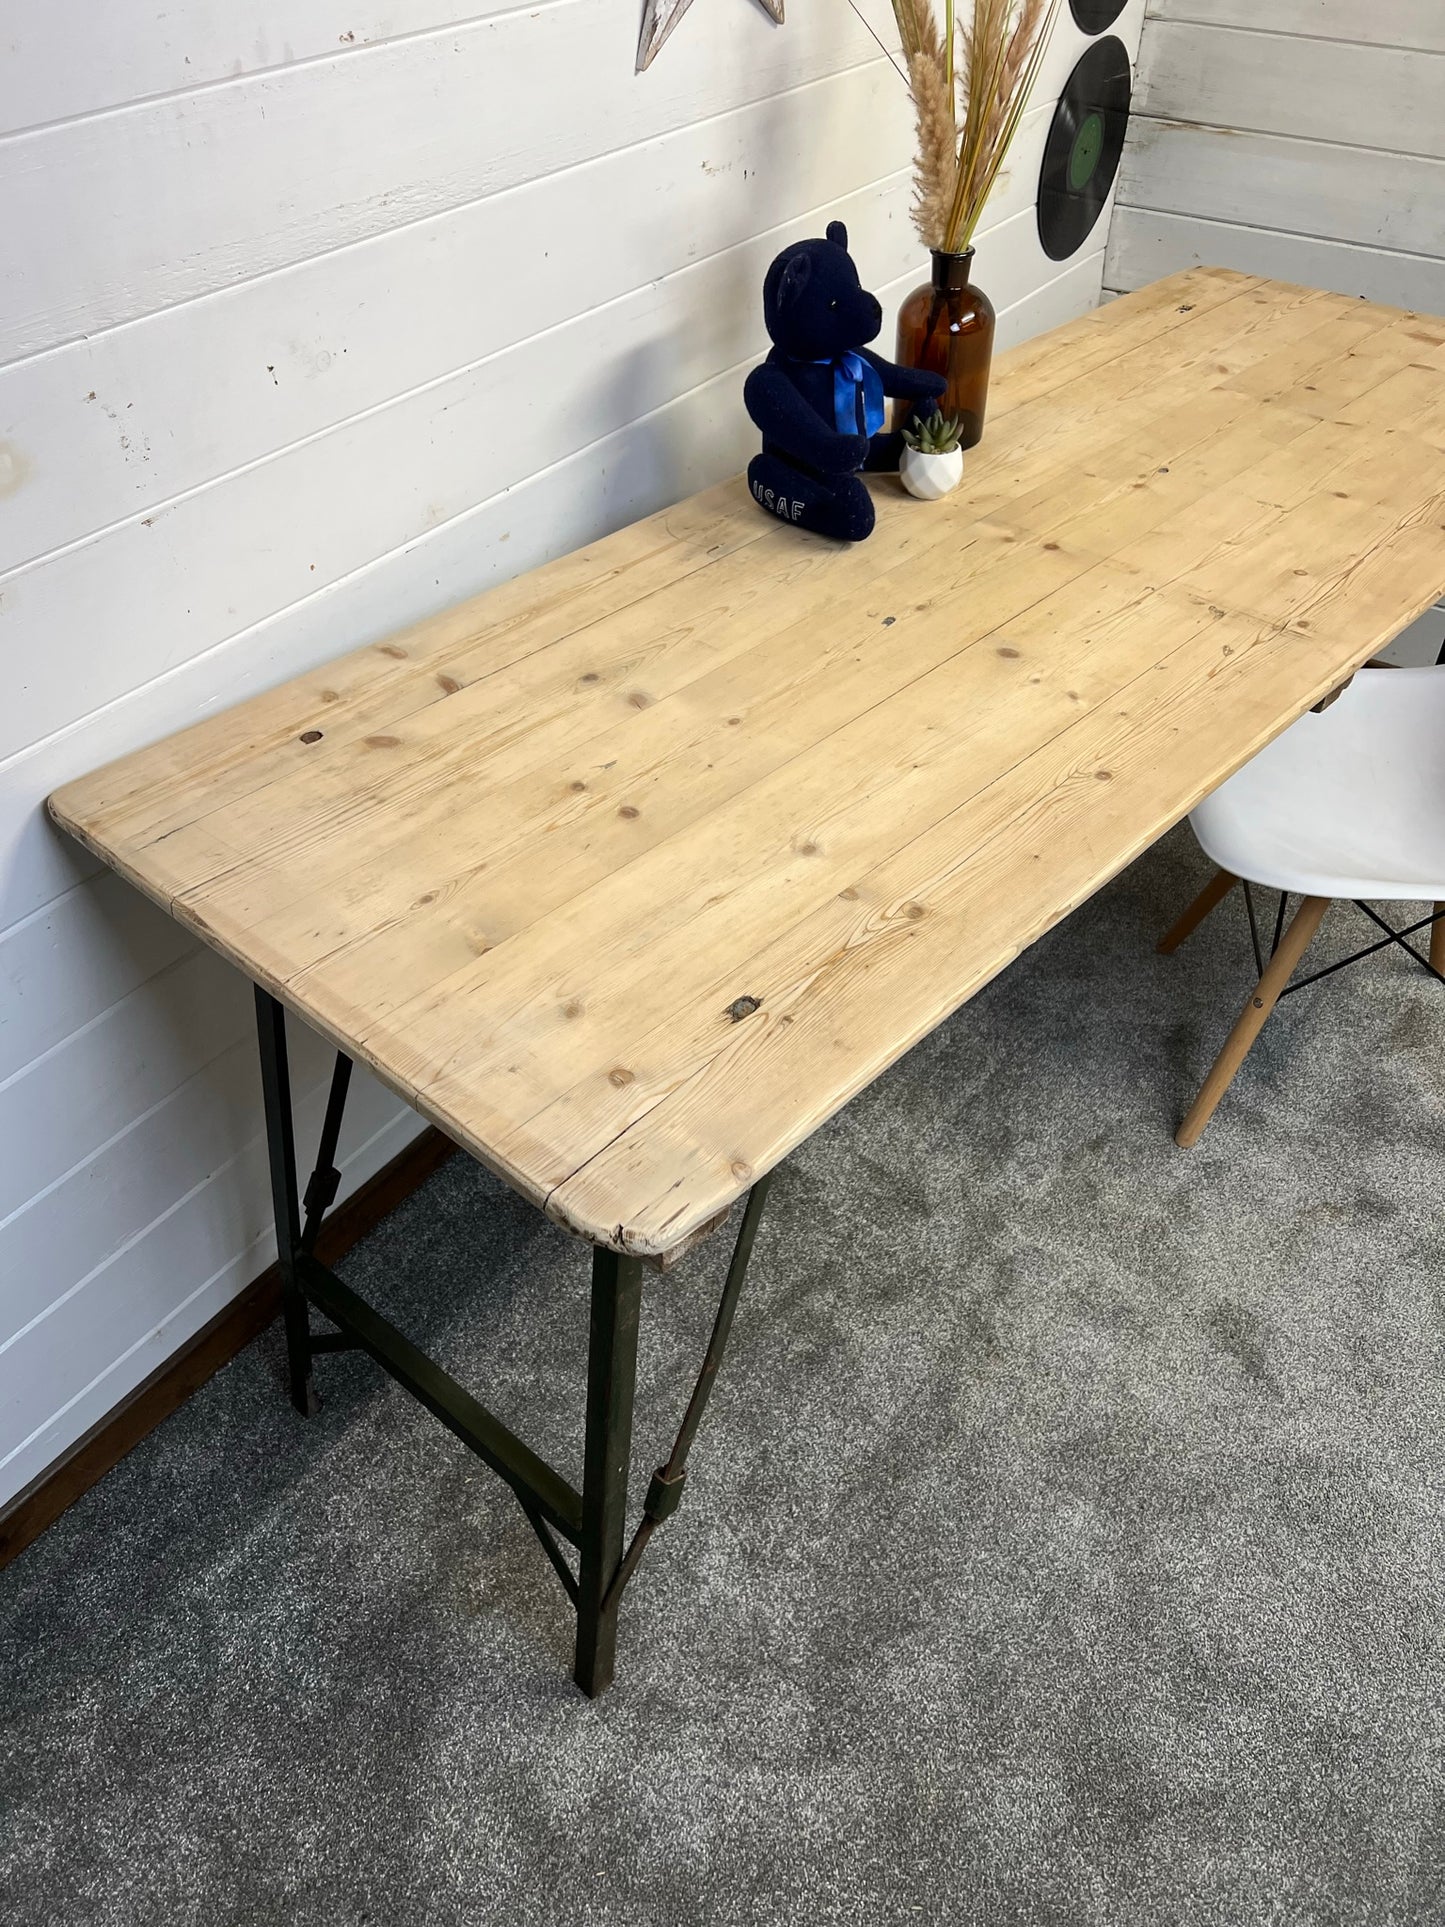 Vintage Wooden Folding Trestle Table Rustic Industrial Farmhouse Dining Garden Catering Market Stall